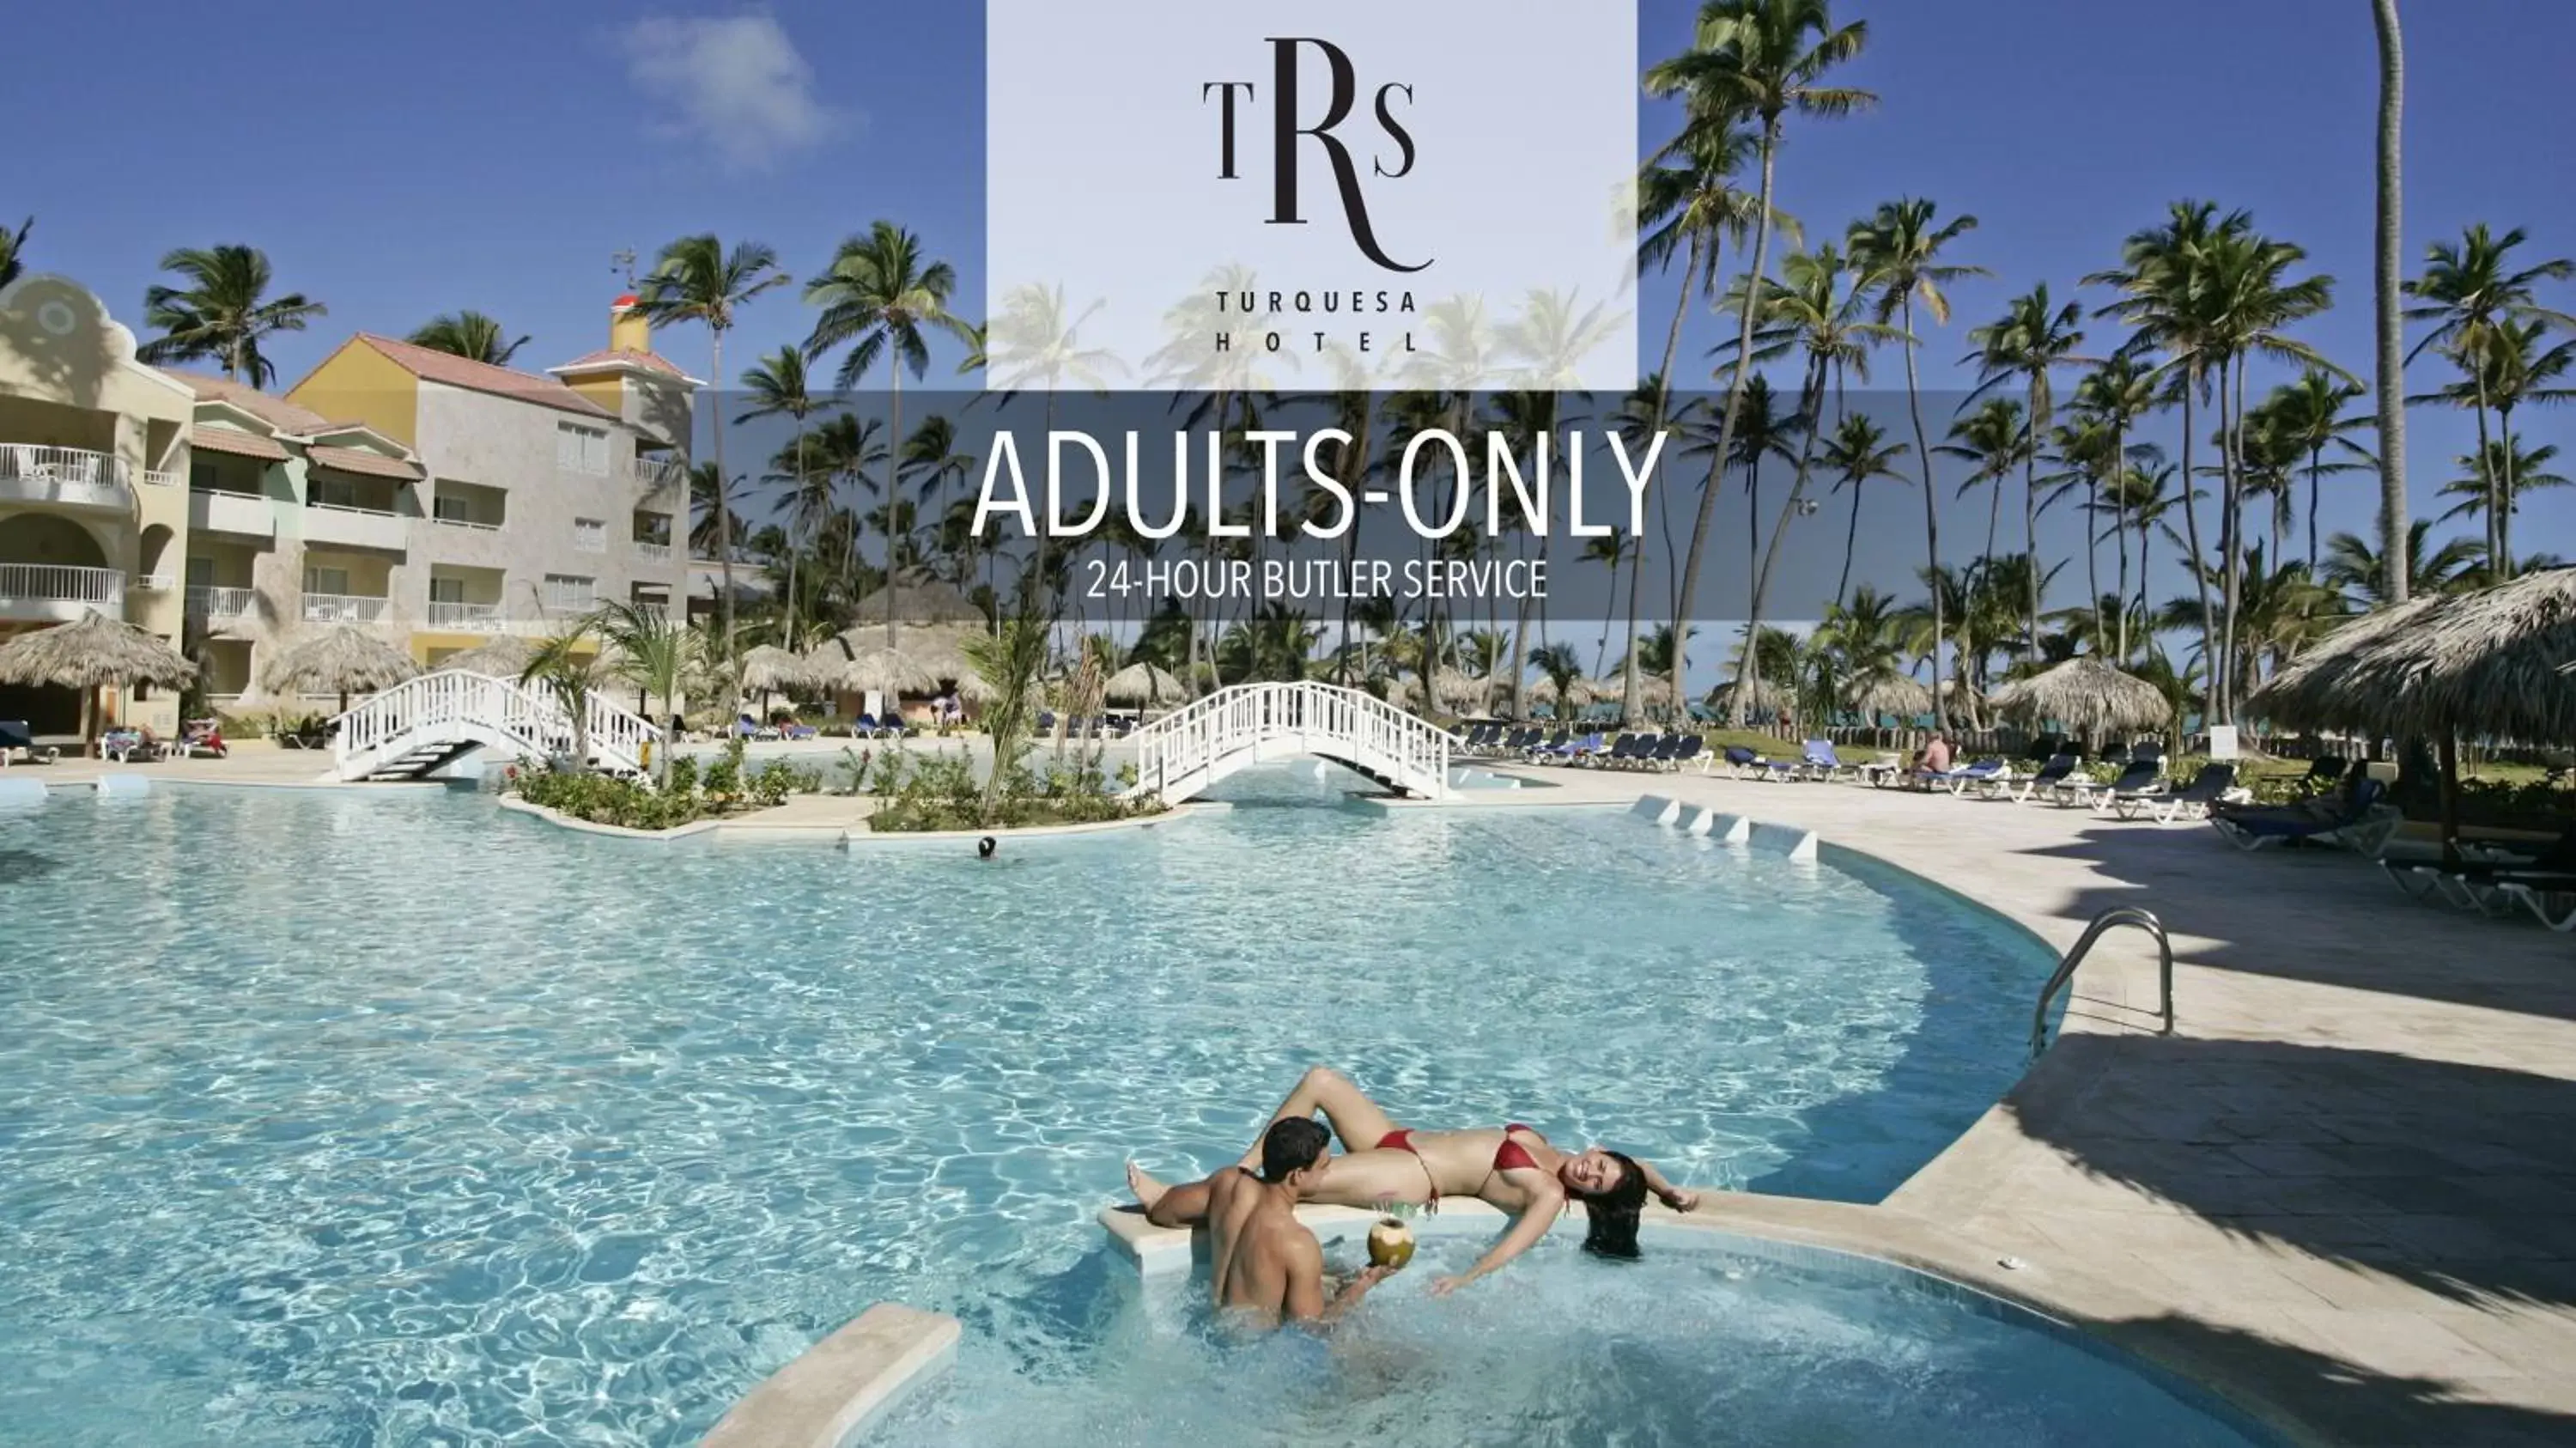 Swimming Pool in TRS Turquesa Hotel - Adults Only - All Inclusive